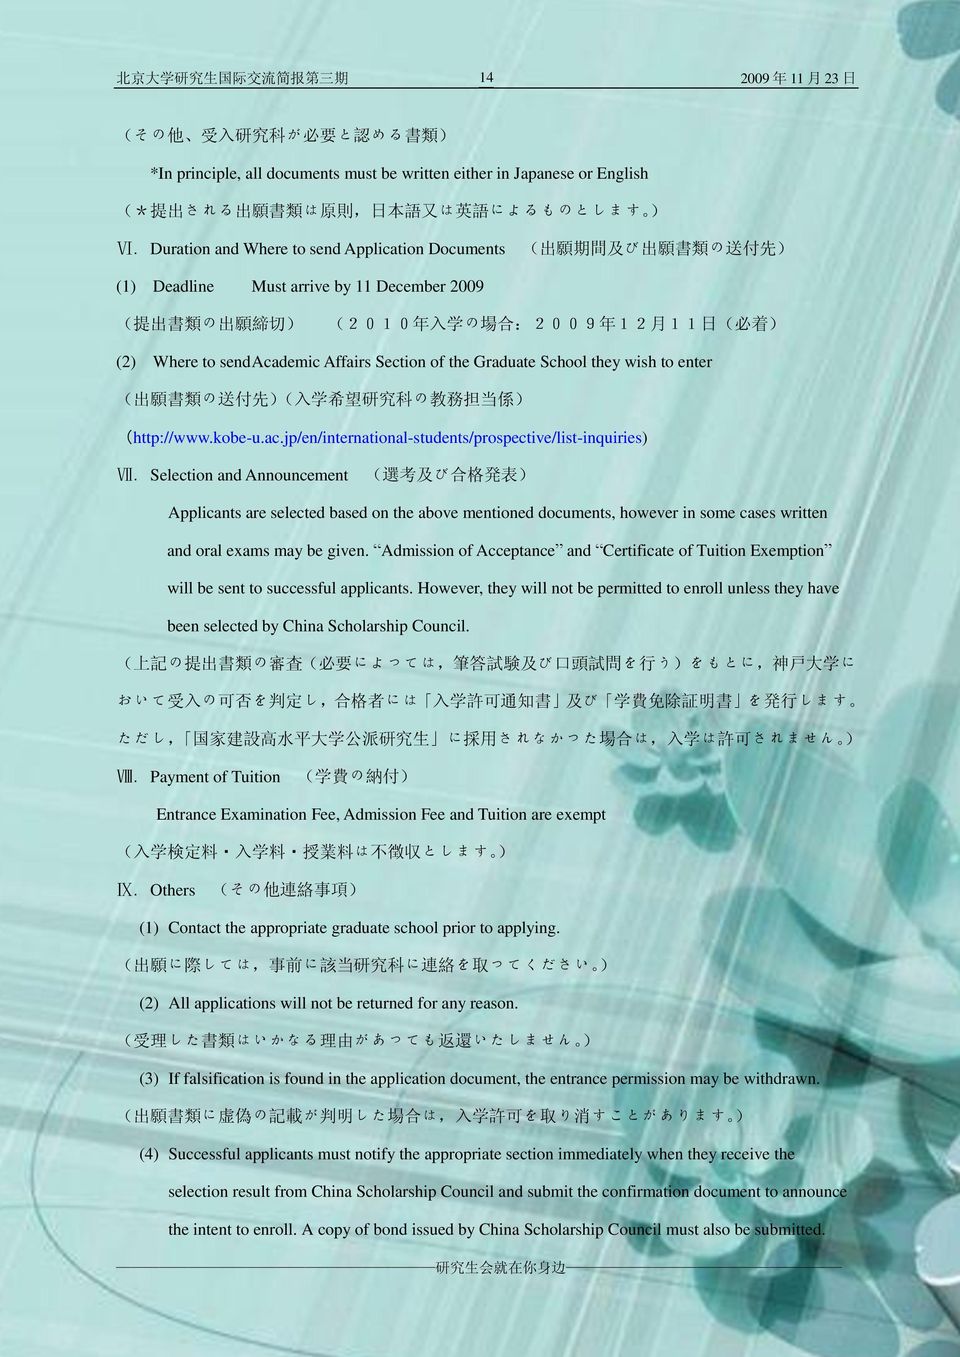 Where to send Academic Affairs Section of the Graduate School they wish to enter ( 出 願 書 類 の 送 付 先 )( 入 学 希 望 研 究 科 の 教 務 担 当 係 ) (http://www.kobe-u.ac.